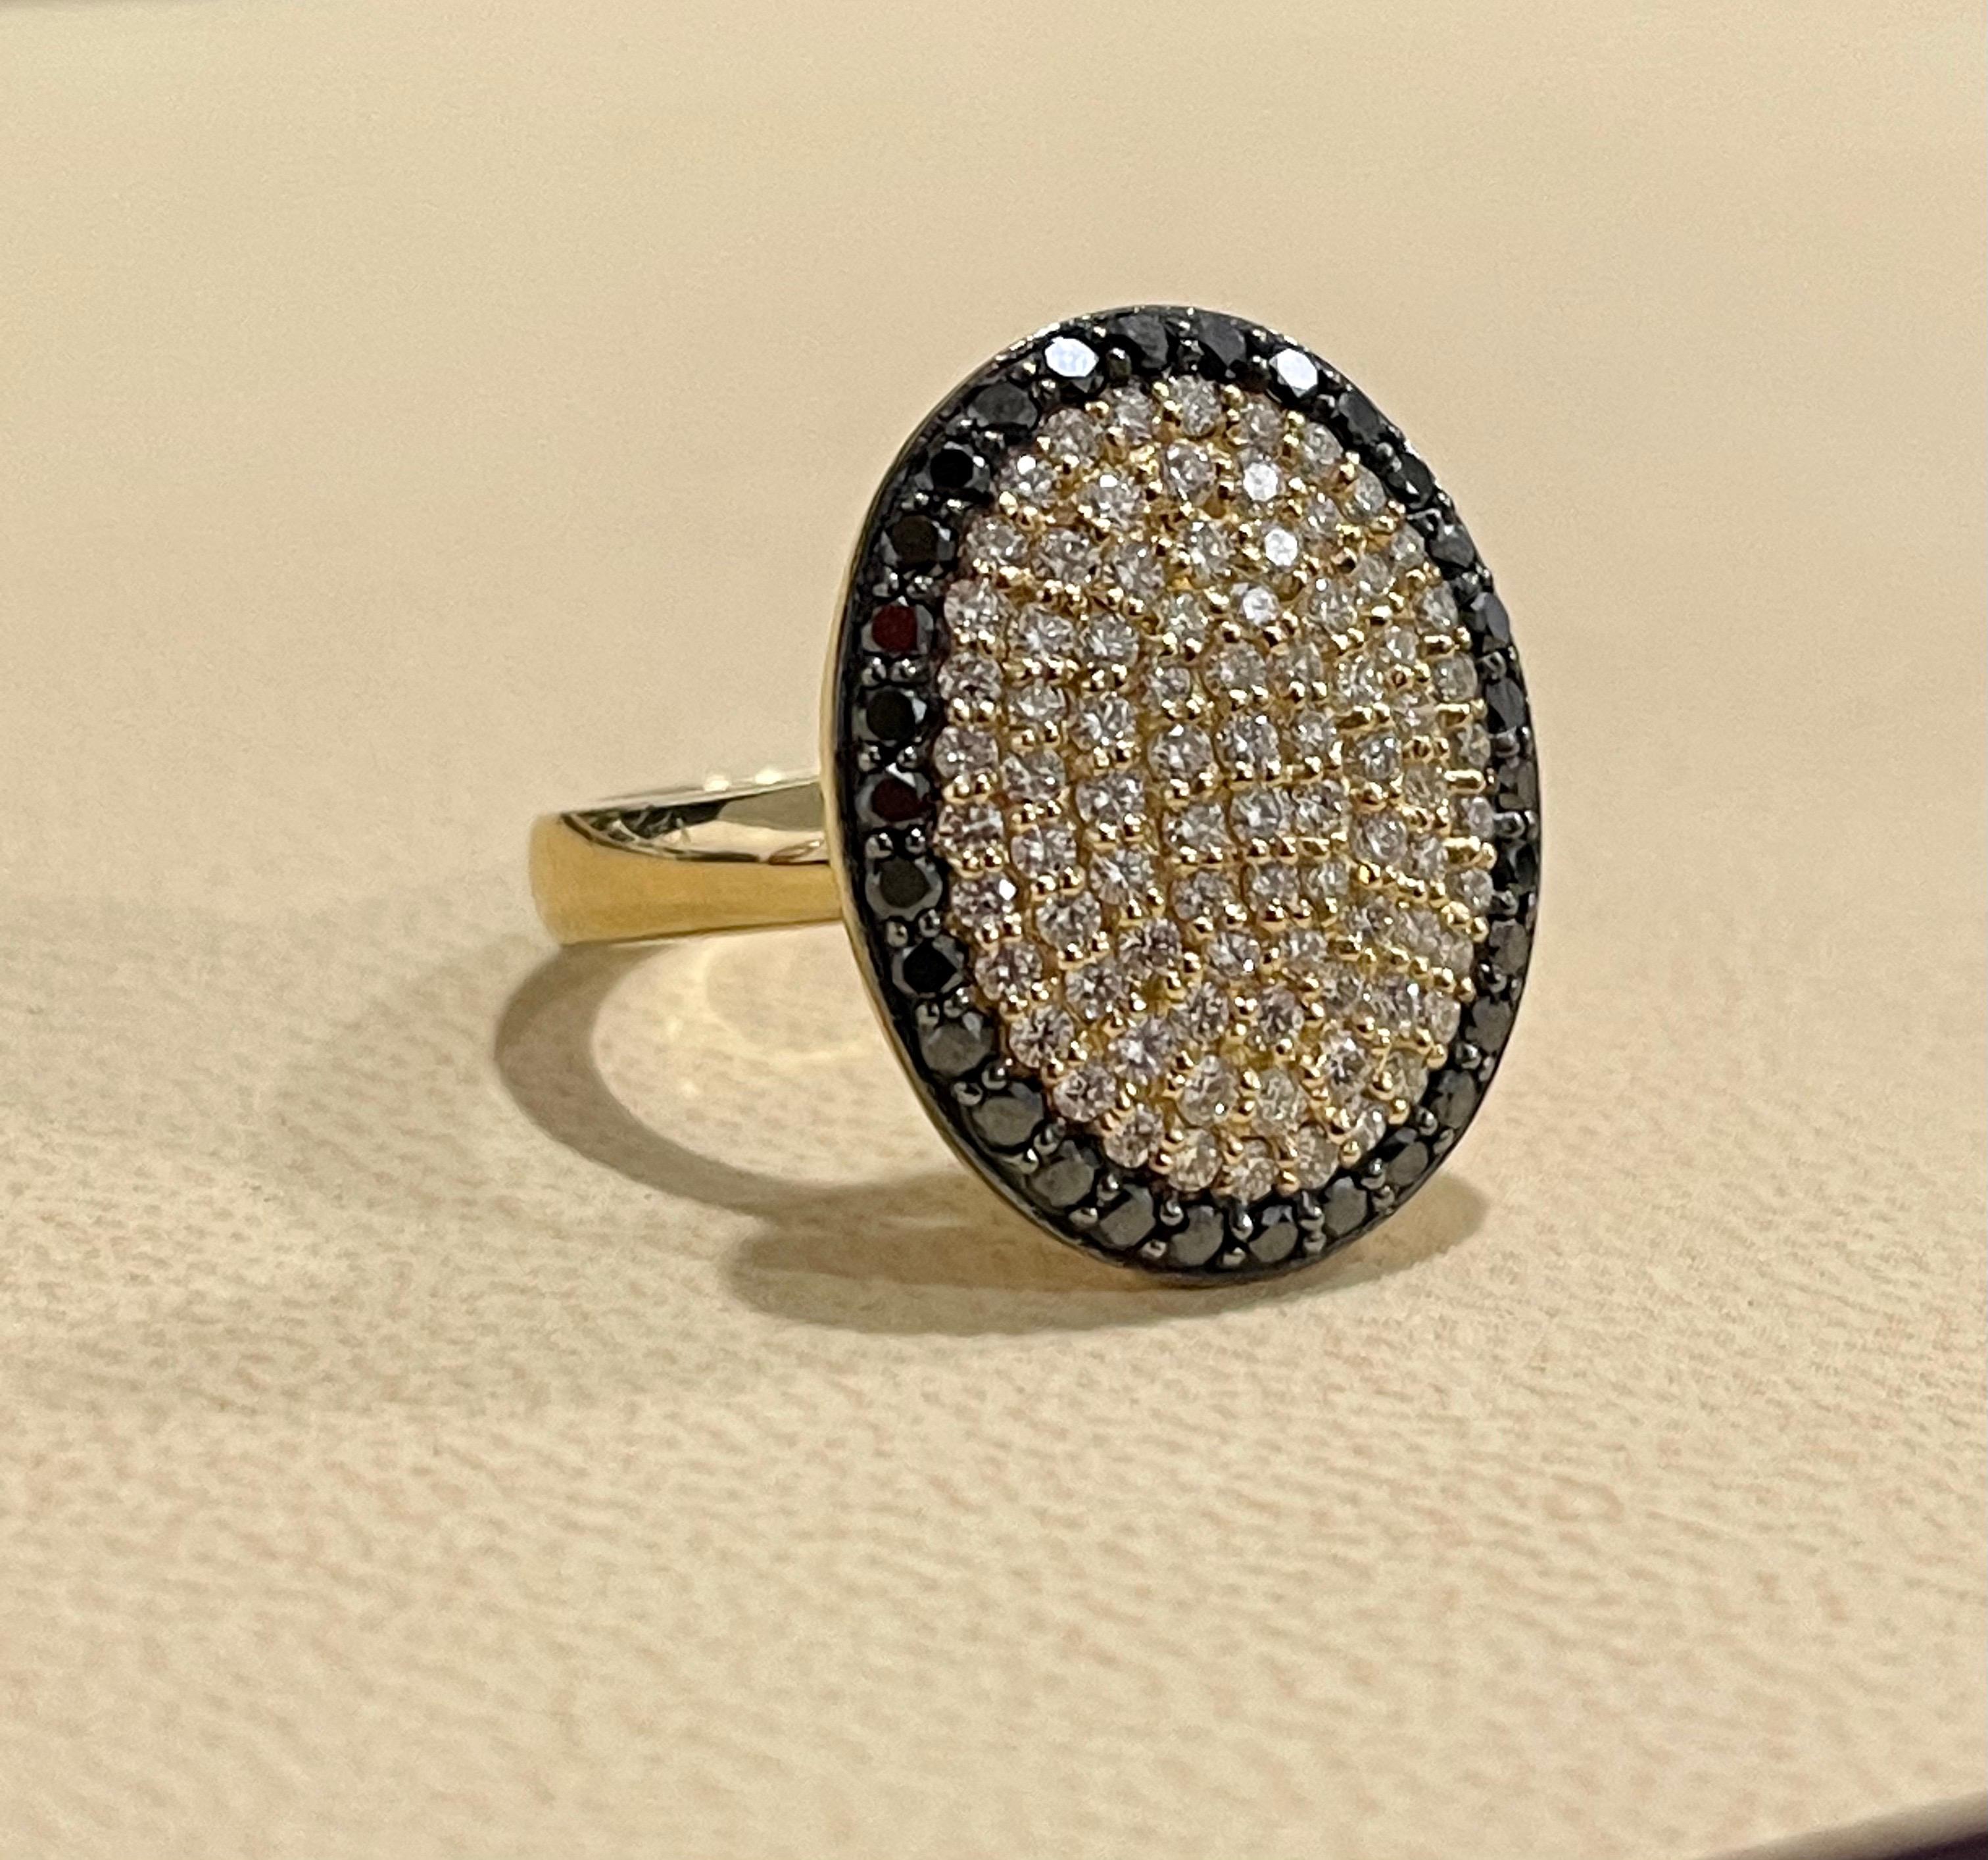 Designer Effy's 1.4 Carat Black & White Diamond Cocktail Ring 14 Kt Yellow Gold
30 1.6 MM Diamonds 
54    one pointer
30 diamonds are 1.25 pointer
Total  1.41 ct  Brilliant cut round diamonds .


Diamond SI to VS  quality and G/H Color
This is a